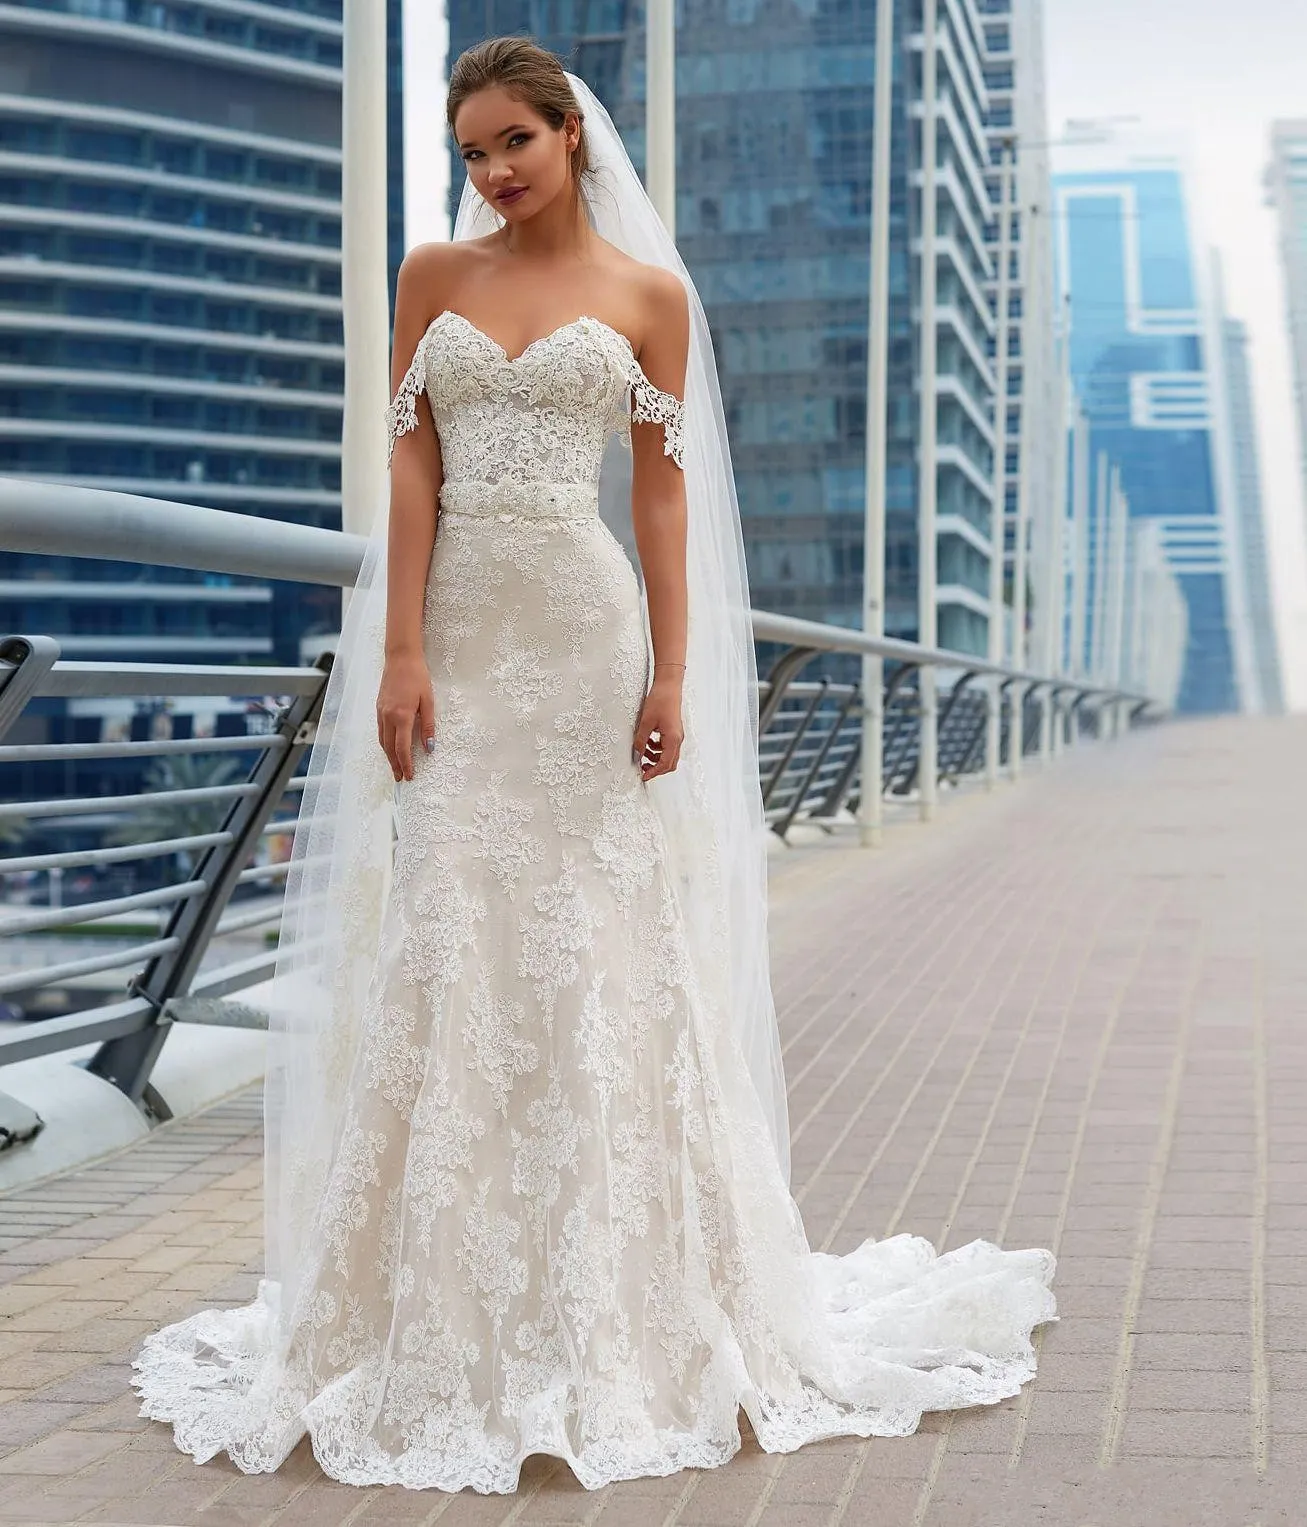 Modest Lace Mermaid Wedding Dresses 2018 Off Shoulder Applique Beach Beho Sweetheart Sashes Pearls Corset Plus Size Bridal Gowns Custom Made